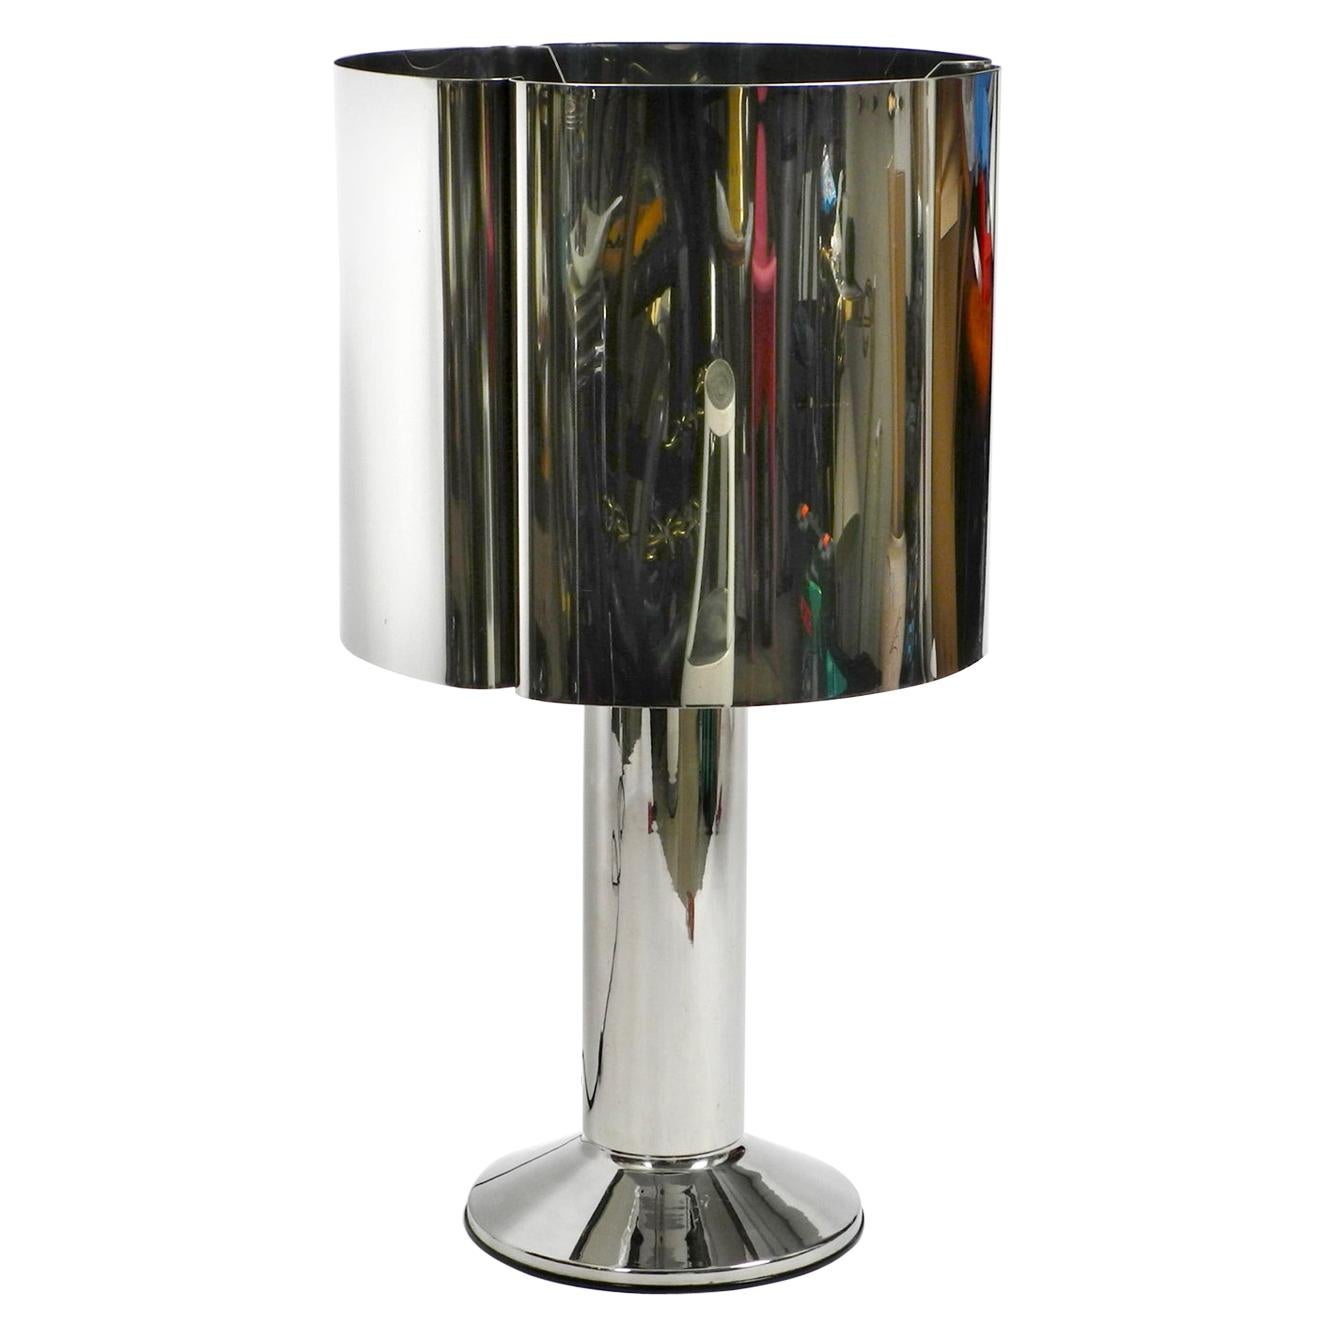 Unique Heavy, Huge XXL 1970s Metal Chrome Table Lamp with Metal Shade